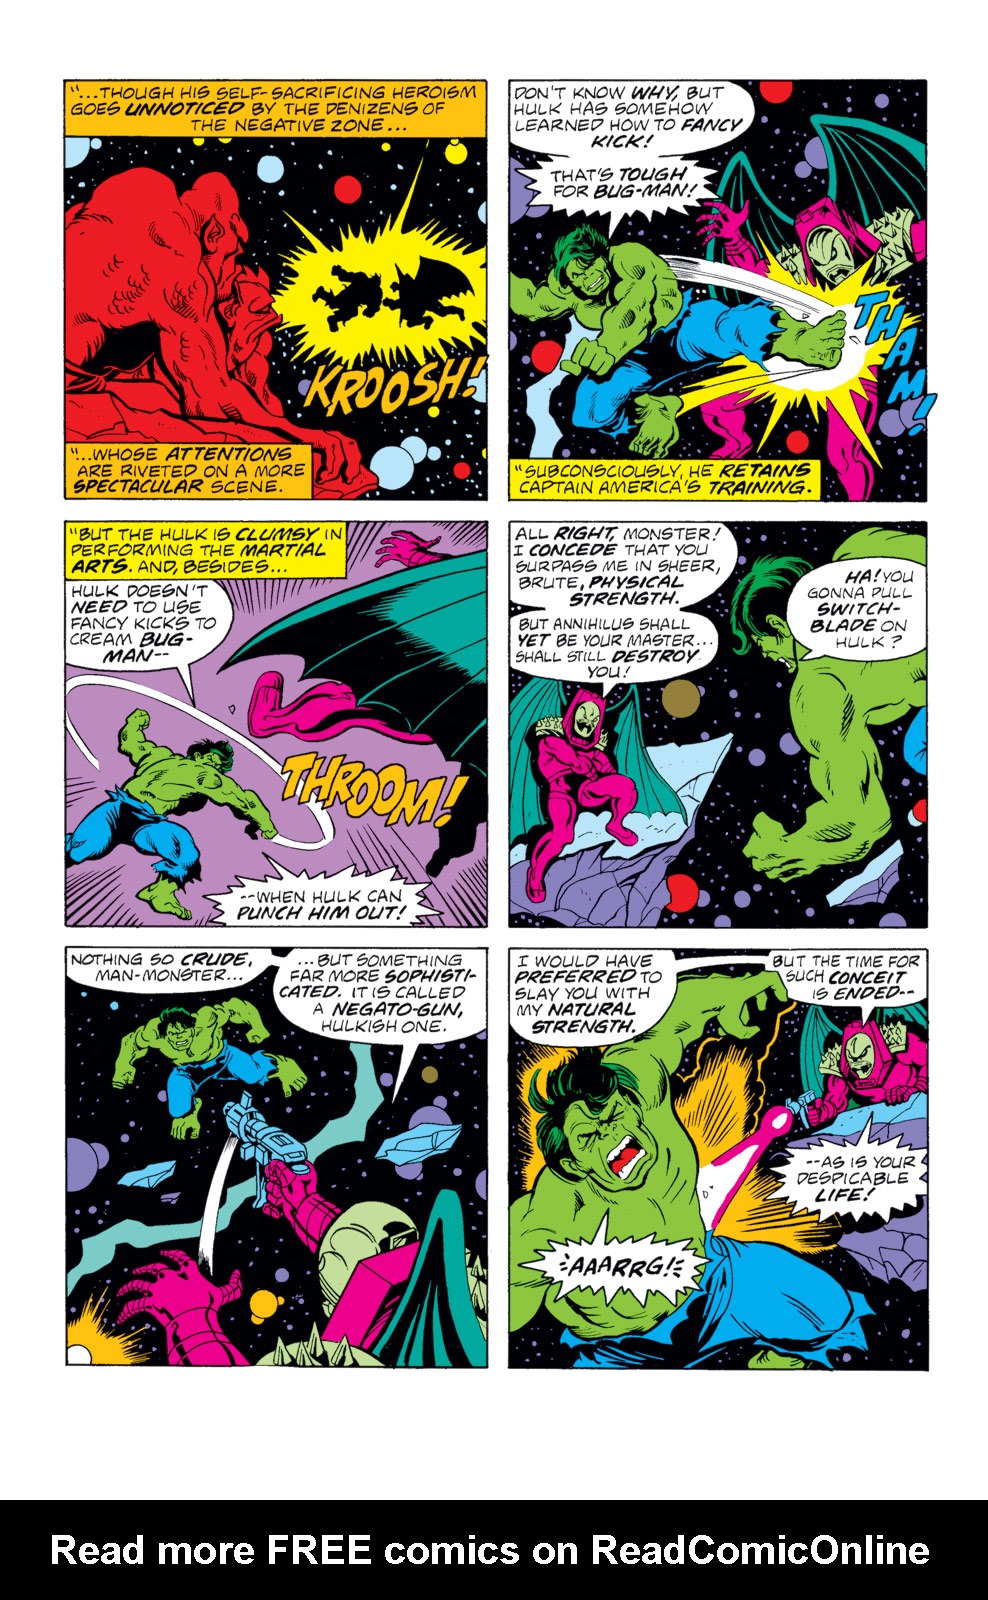 What If? (1977) issue 12 - Rick Jones had become the Hulk - Page 29